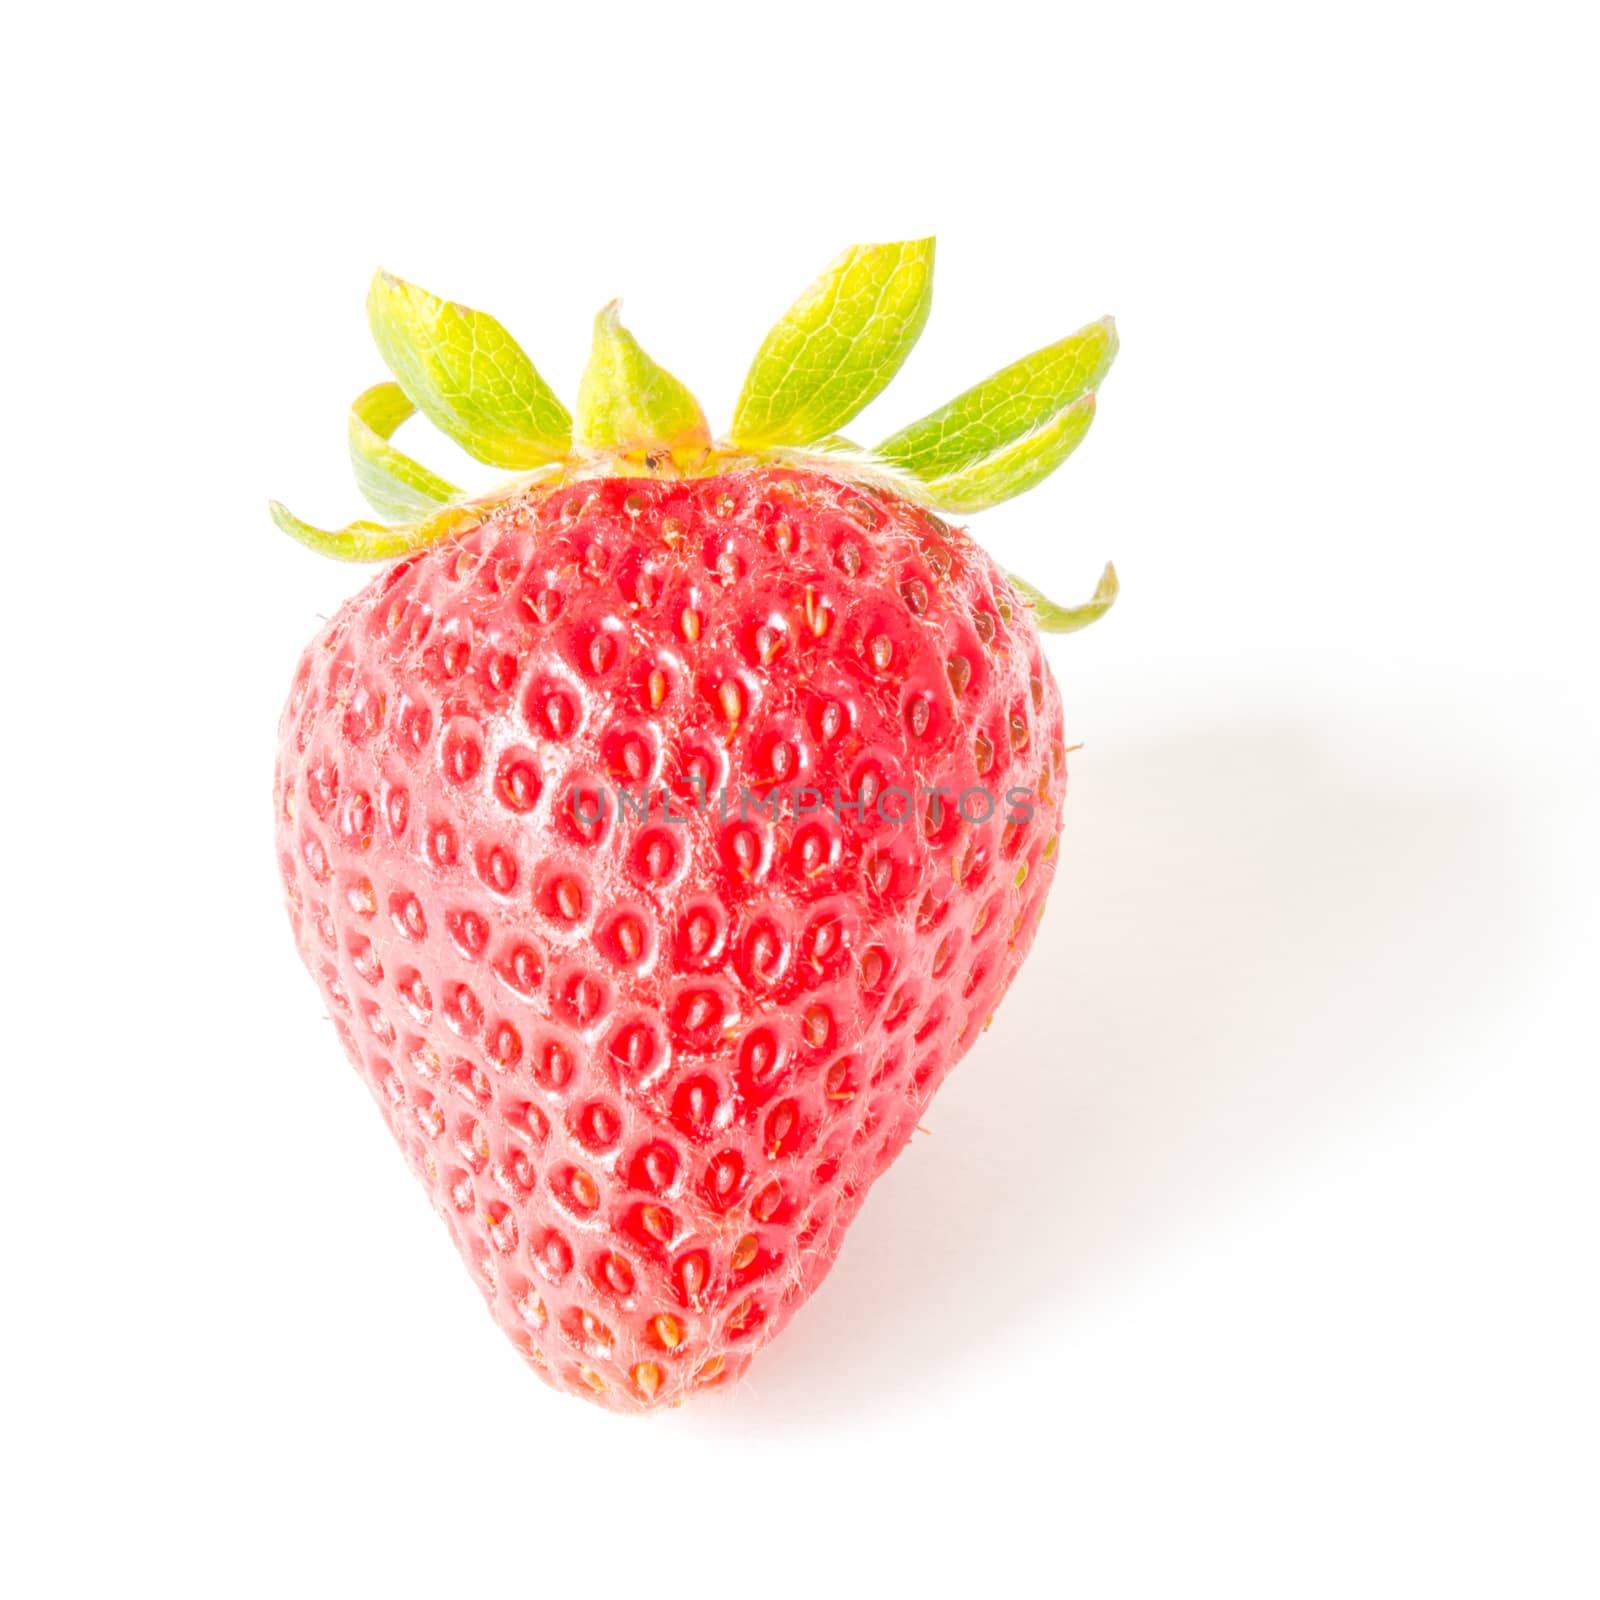 Close-up fresh picked single fresh strawberry isolated on white background. Organic red berry with clipping path and copy space